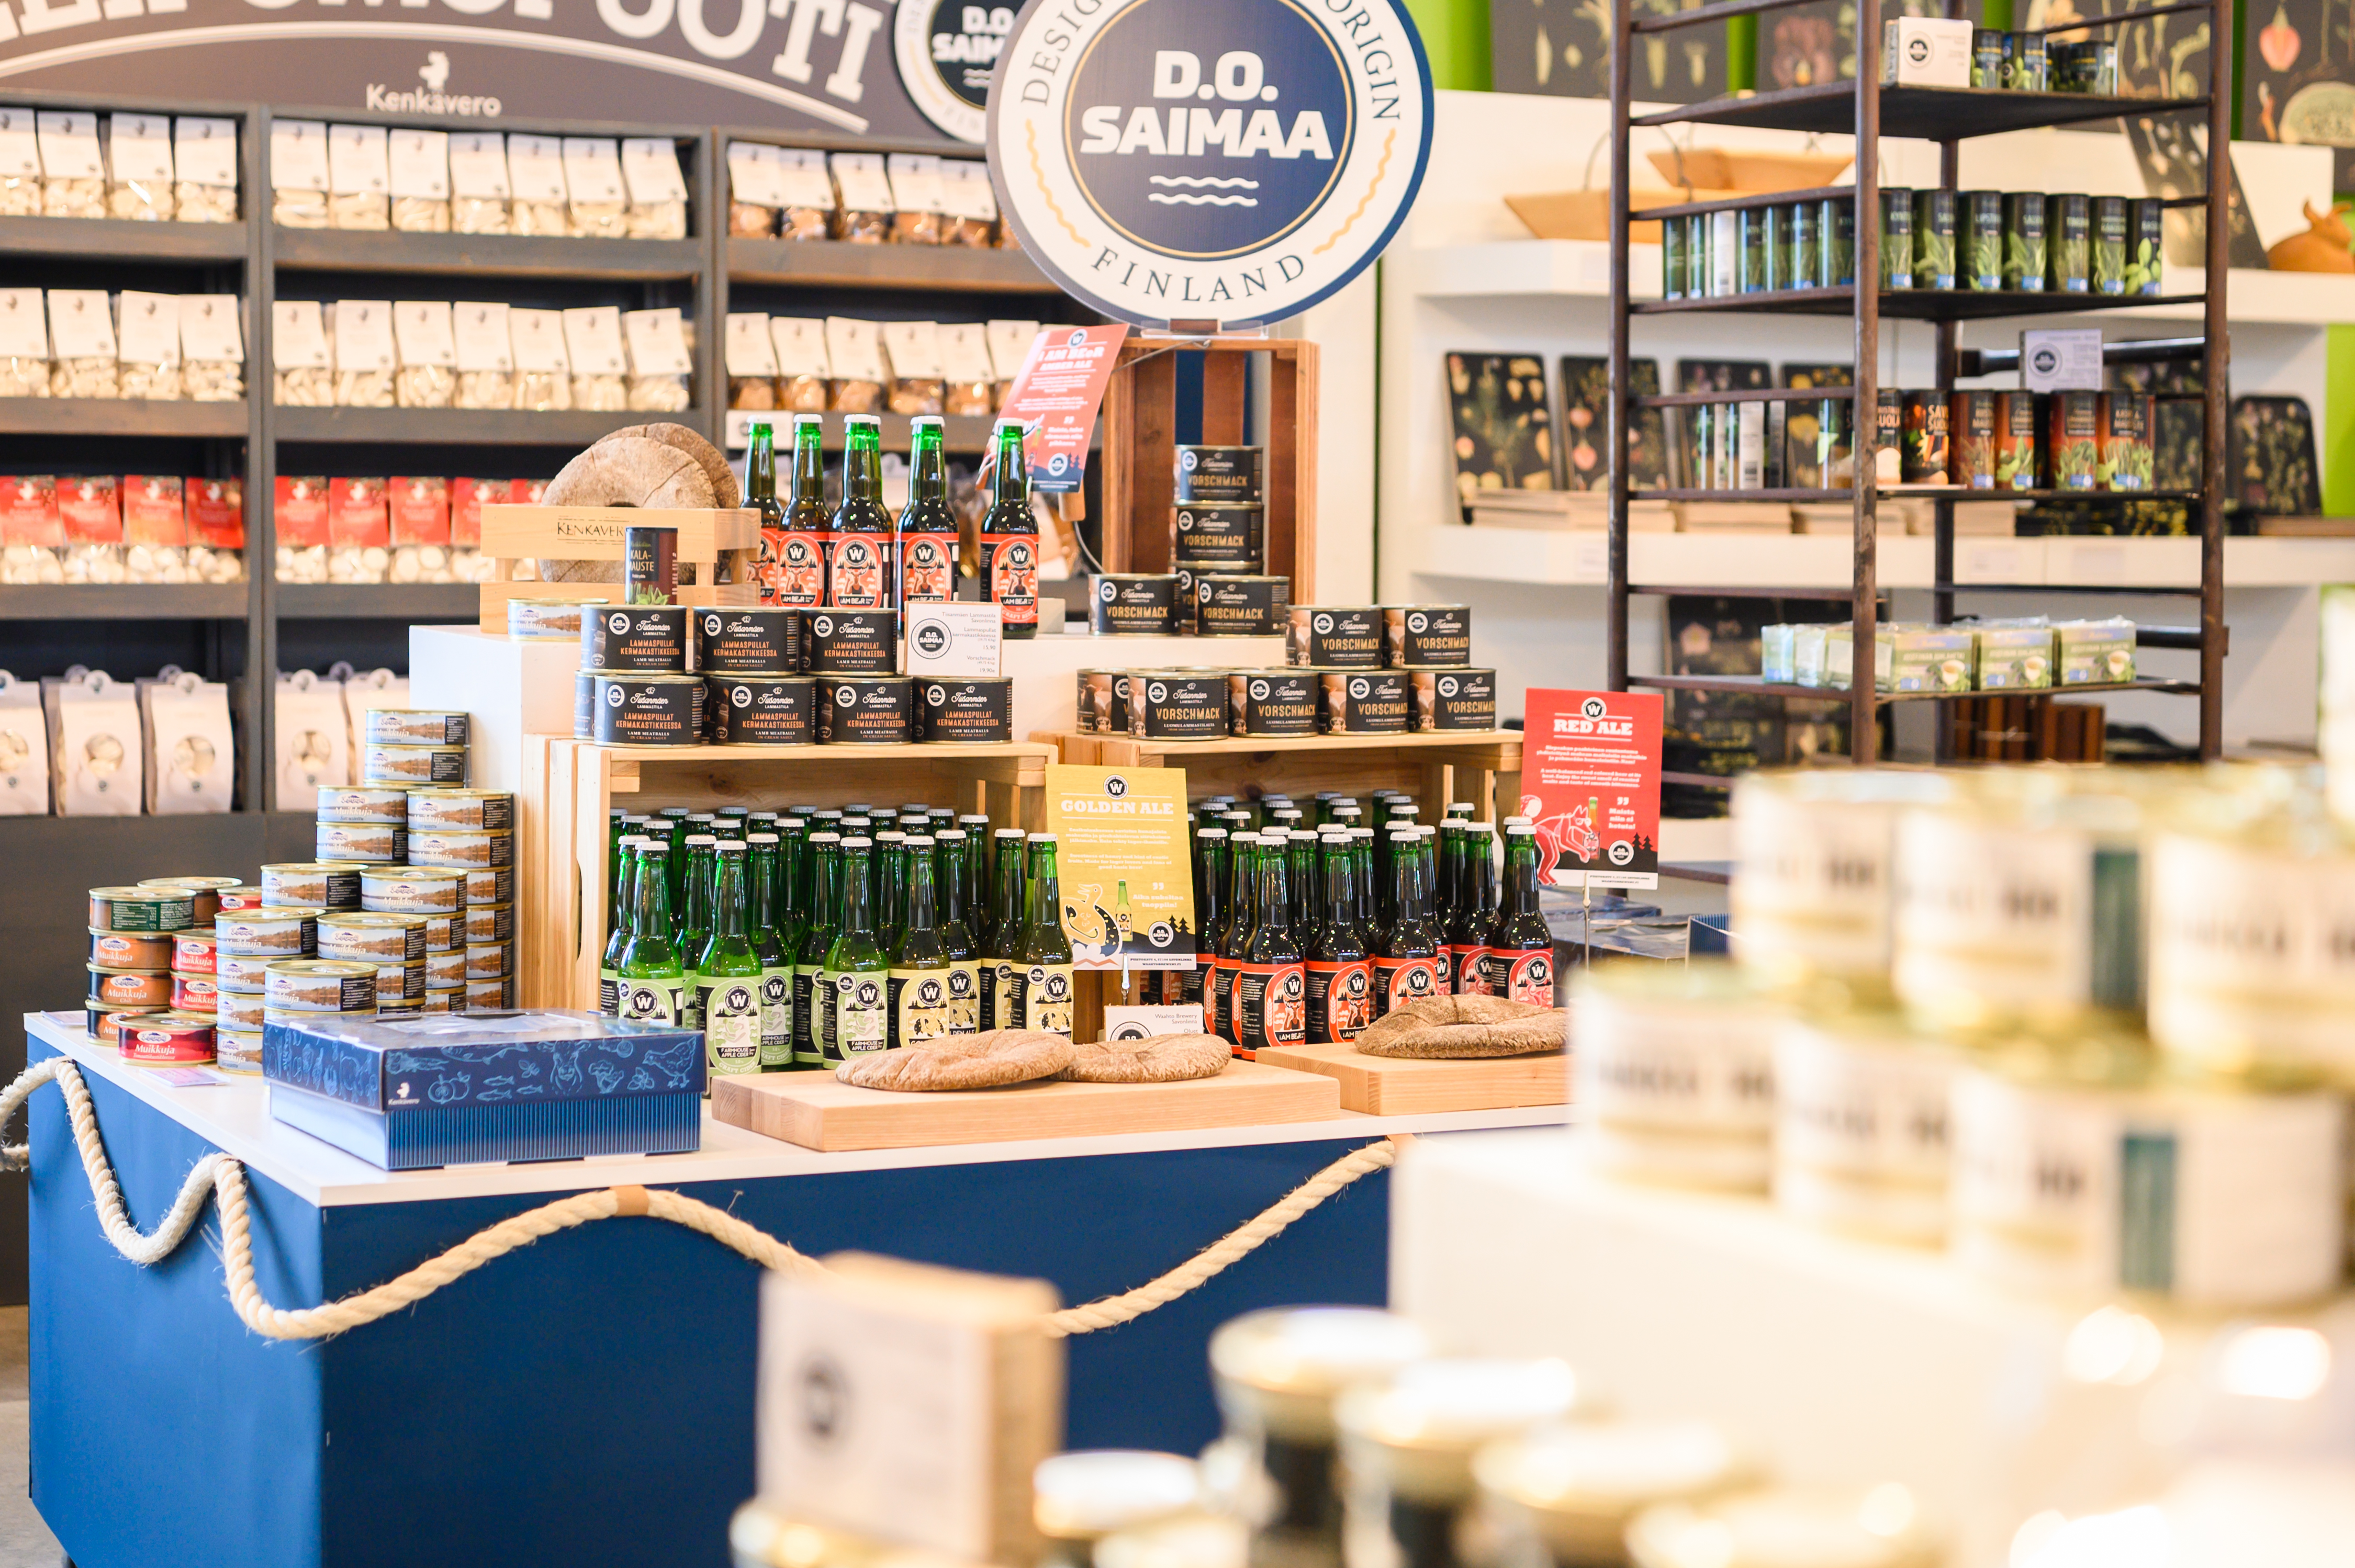 Assemble yourself a delicious dinner of D.O. Saimaa products at the Kenkävero vicarage shop.